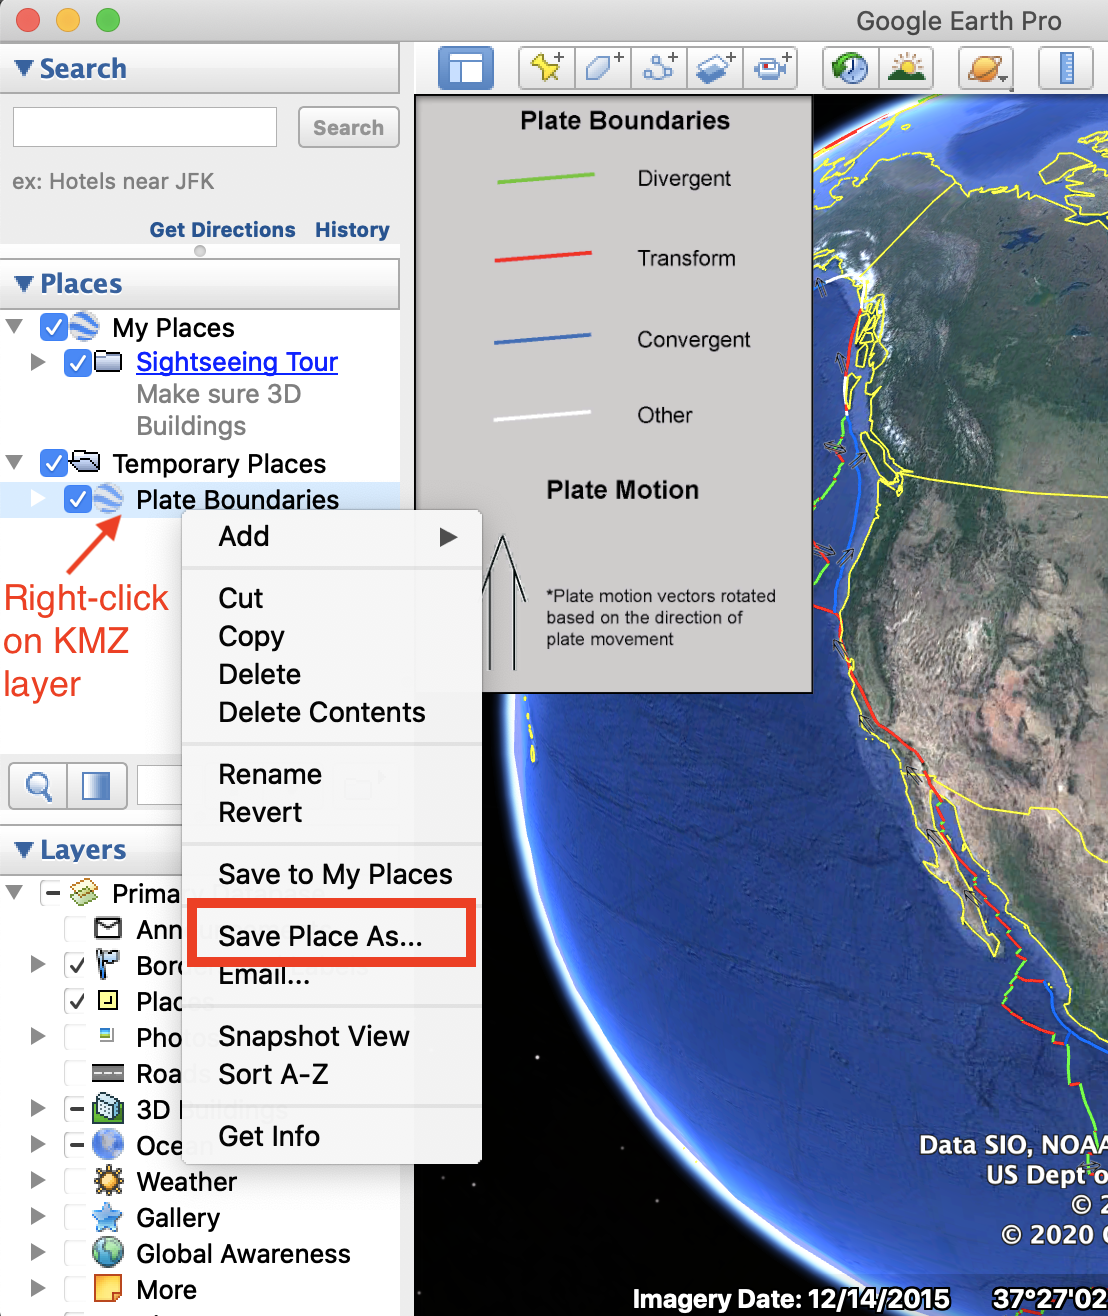 In Google Earth Pro, right-click the KMZ layer and choose Save Place As.